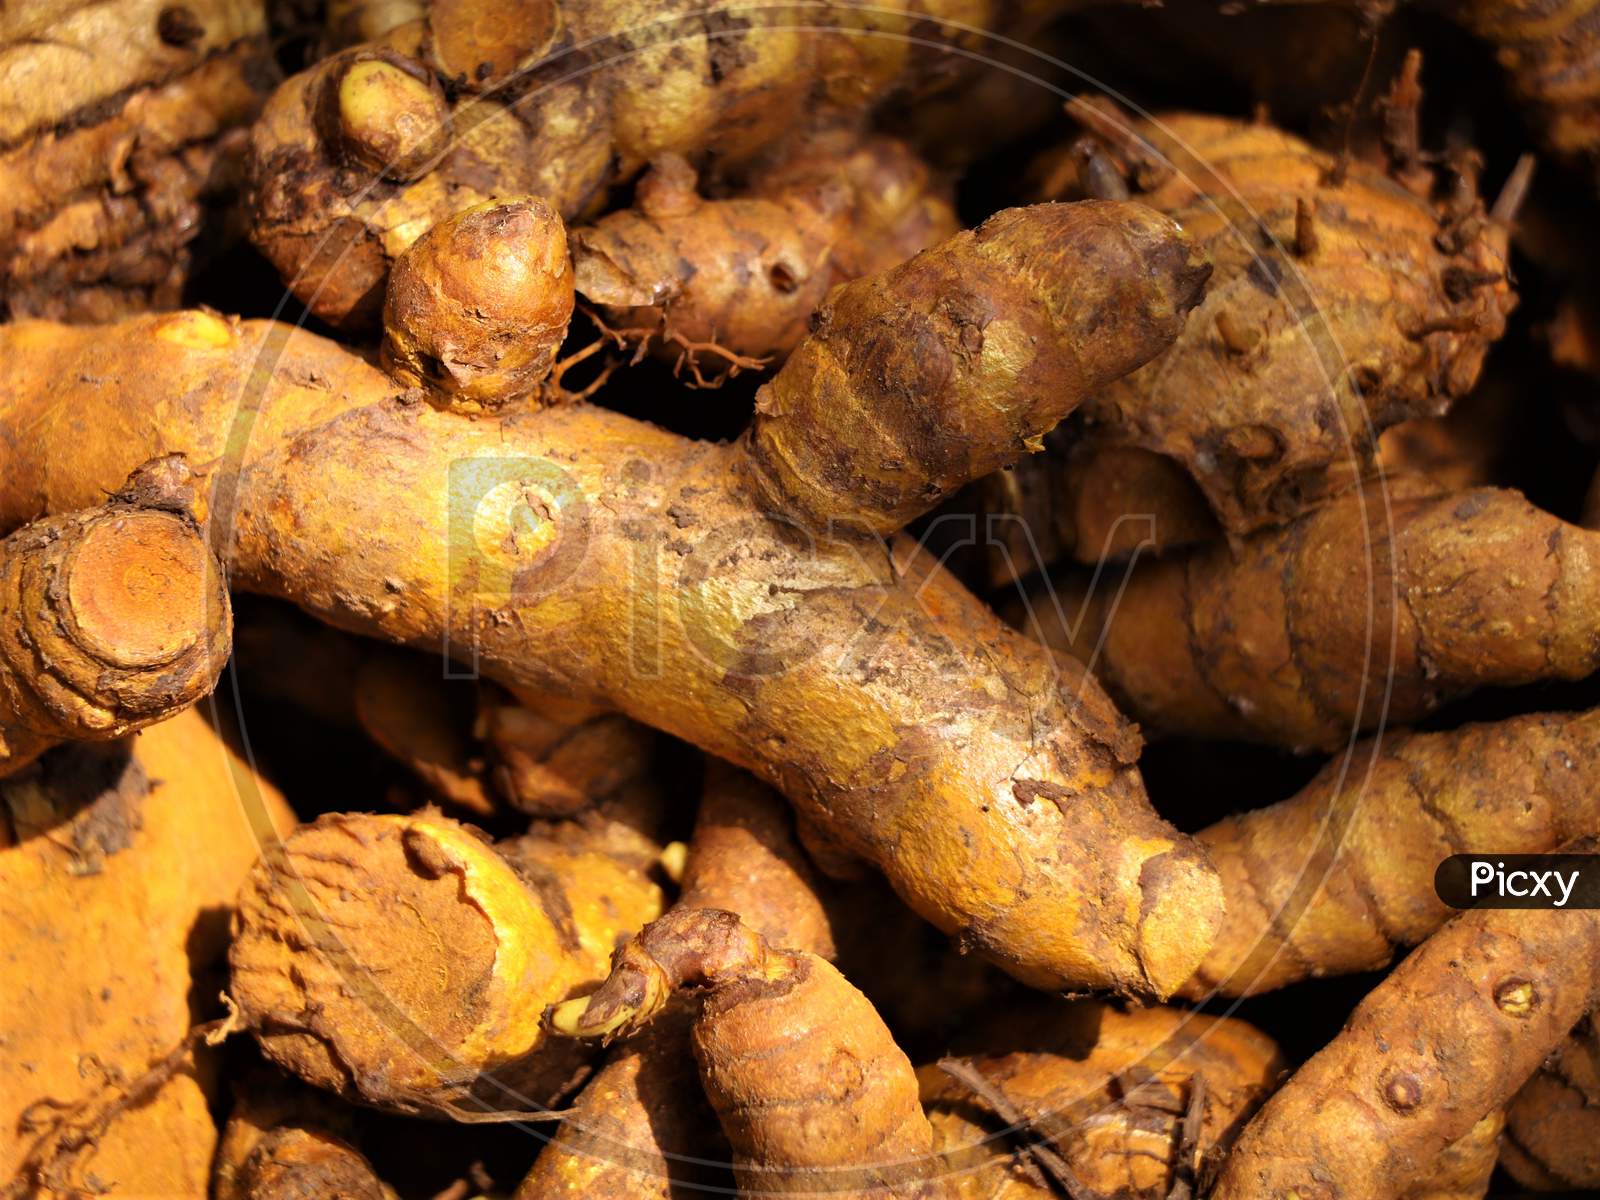 Fresh raw turmeric after steaming